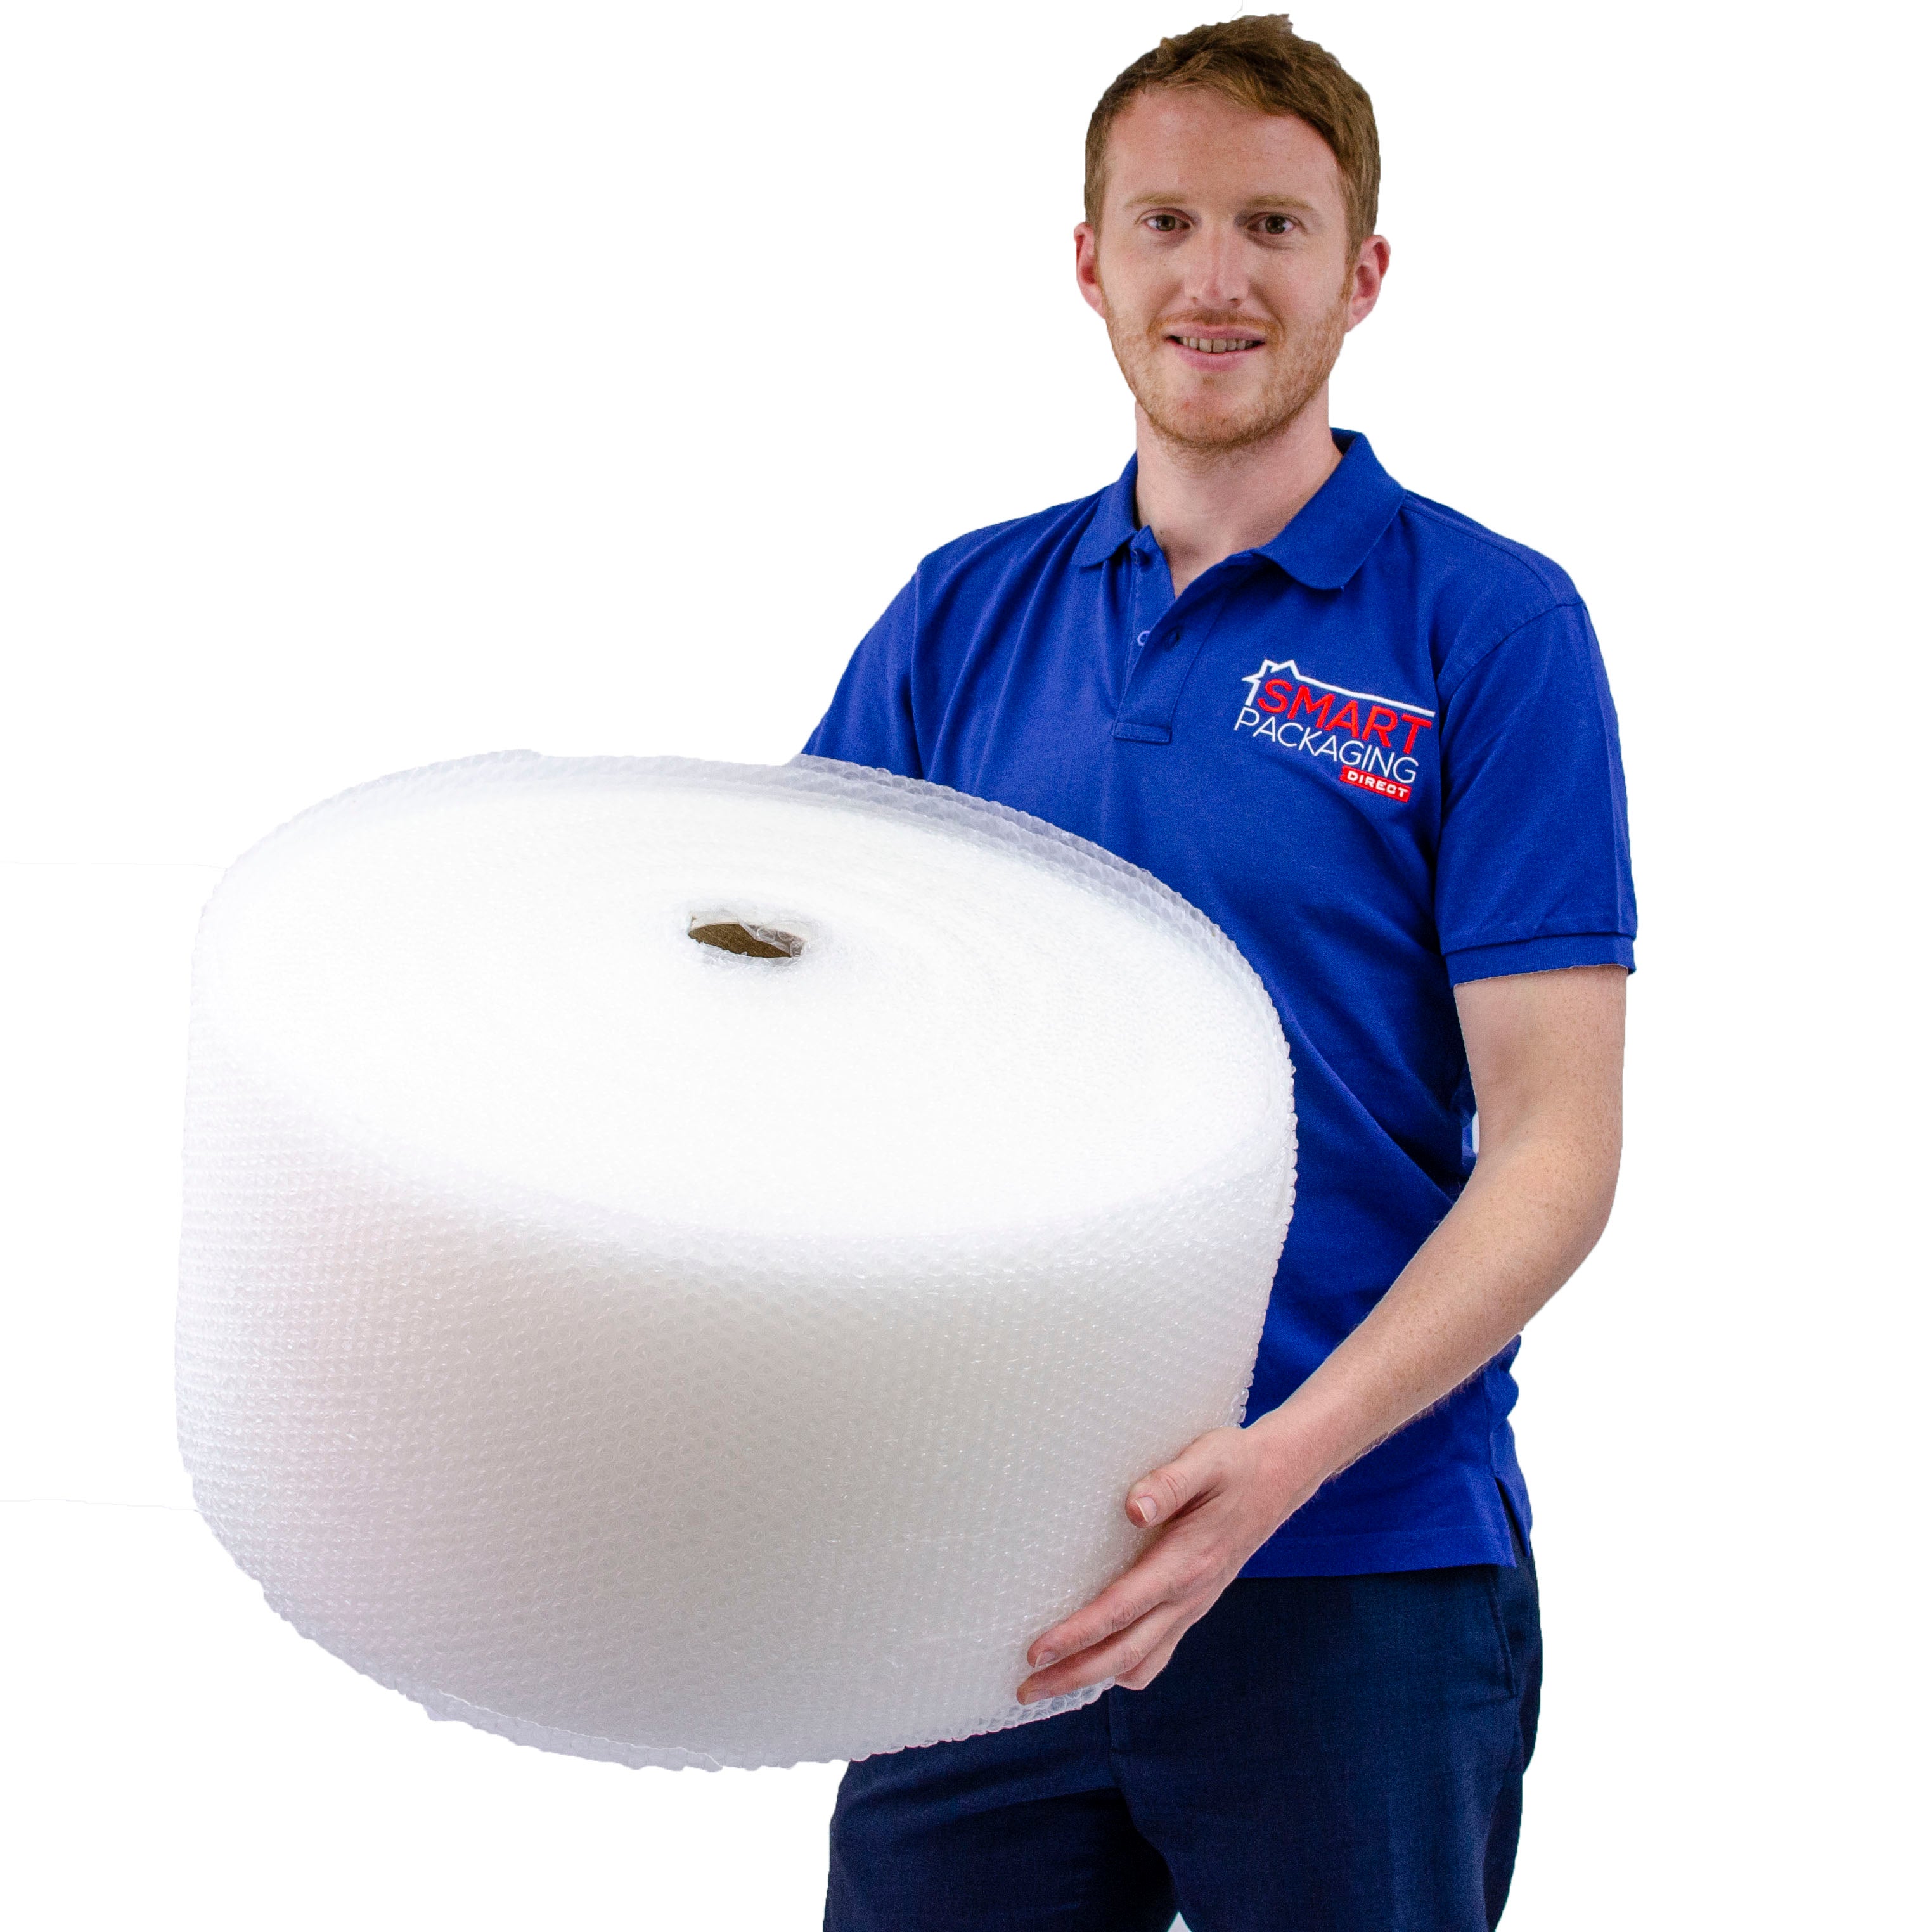 300mm x 5 x 100m ROLLS OF BUBBLE WRAP 500 METRES SMALL